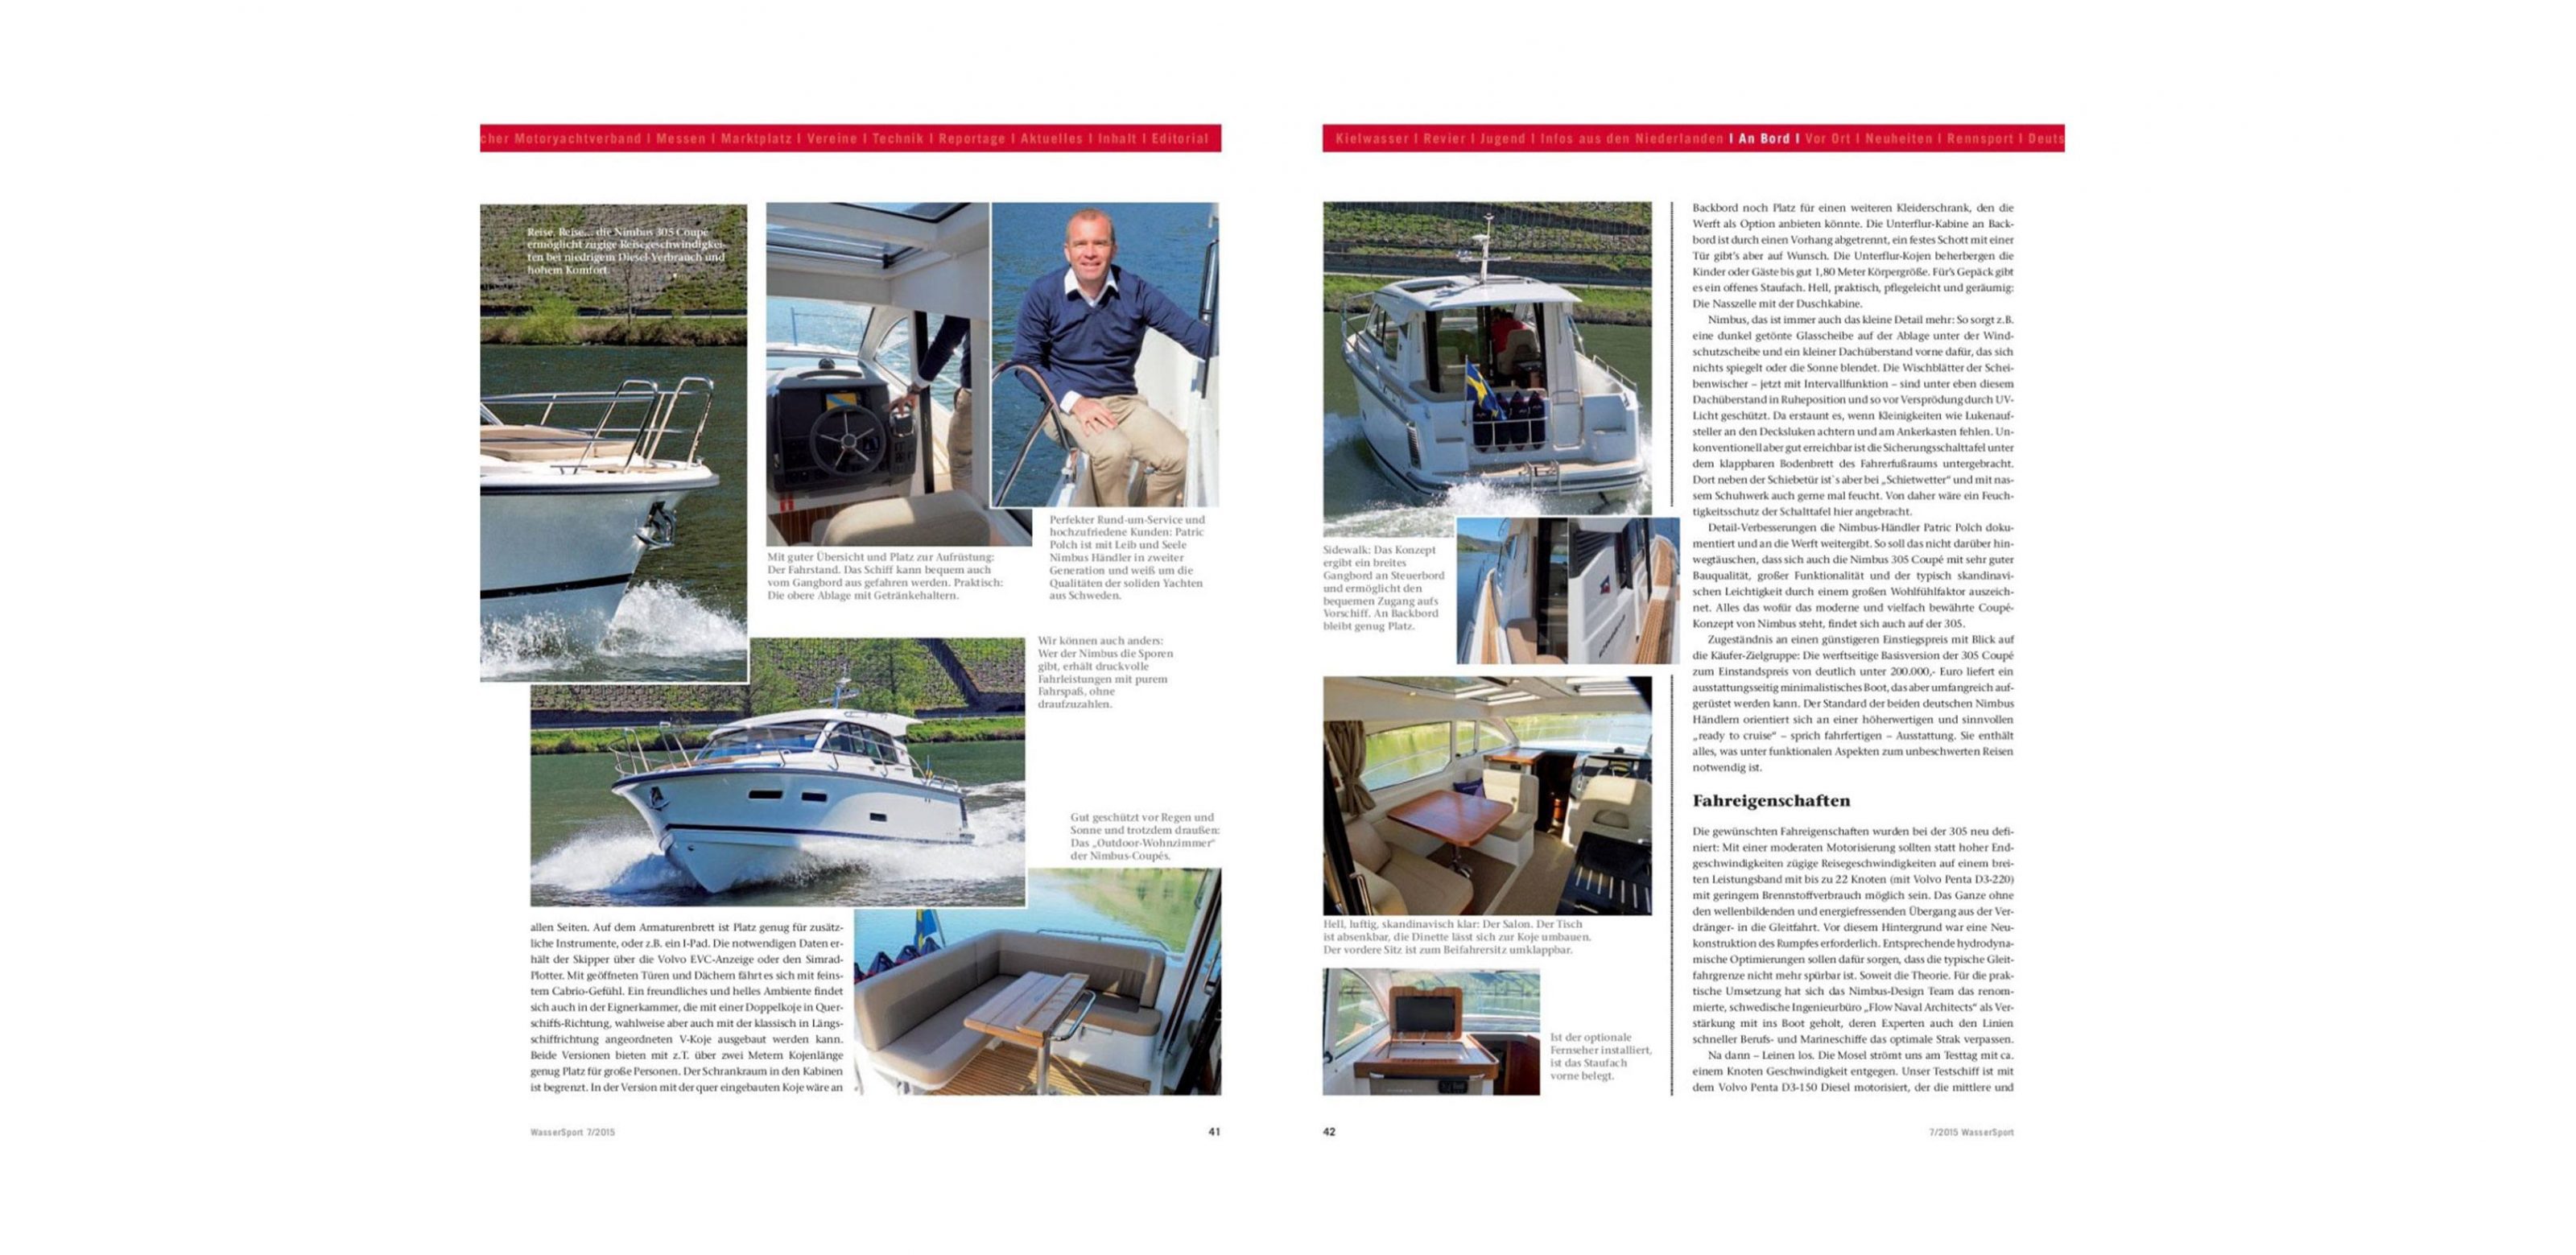 Article in a boat magazine